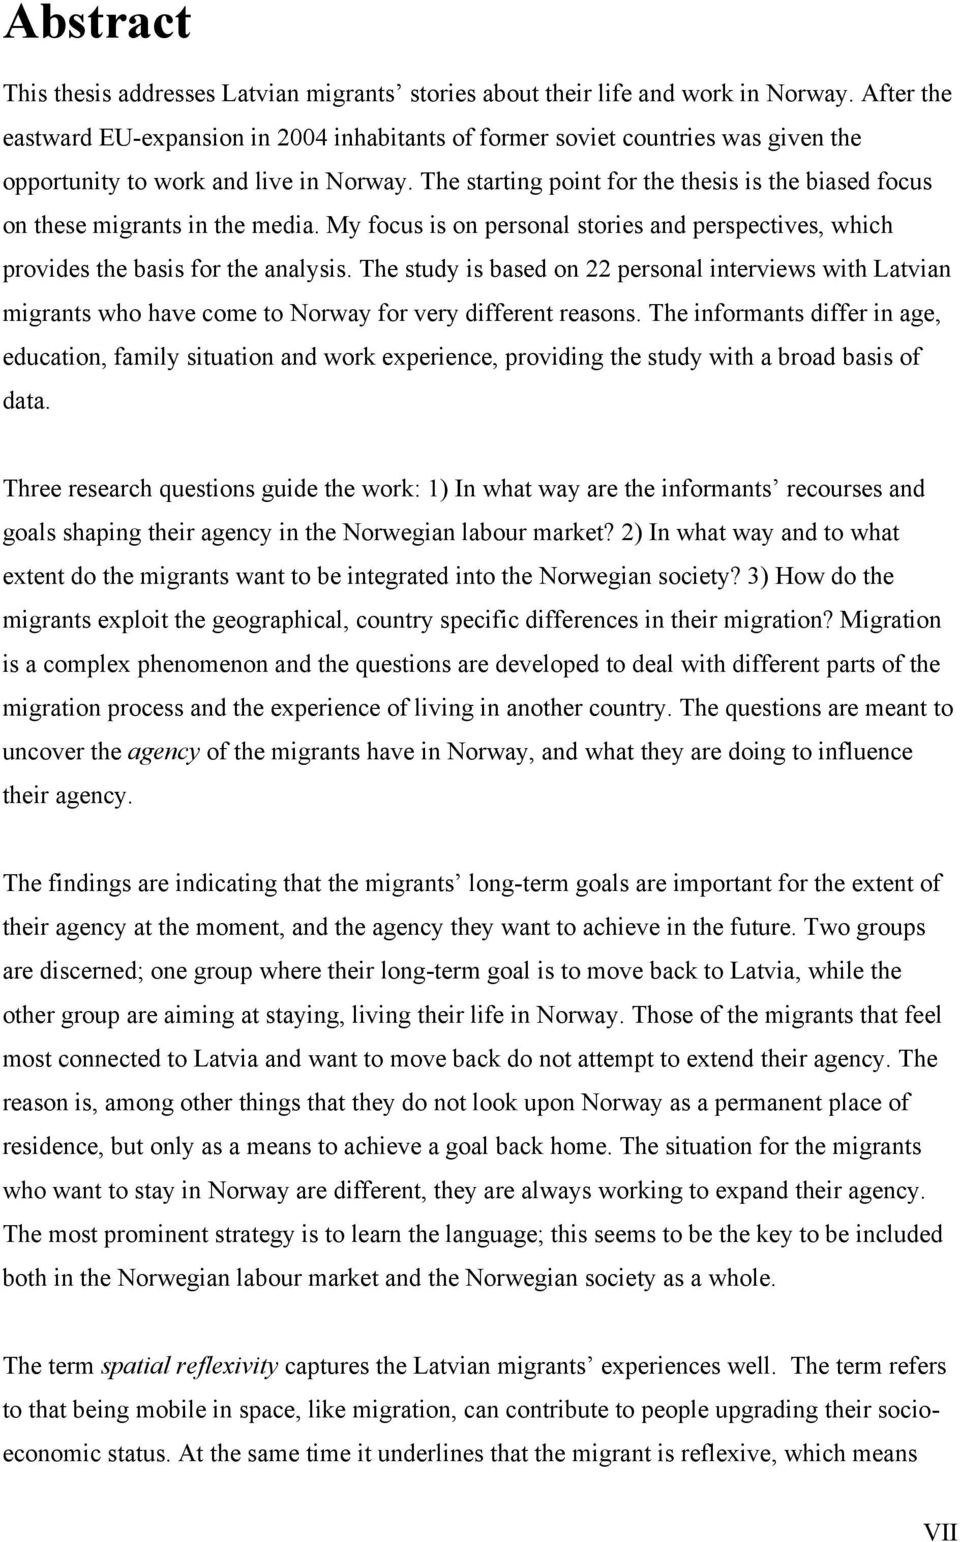 The starting point for the thesis is the biased focus on these migrants in the media. My focus is on personal stories and perspectives, which provides the basis for the analysis.